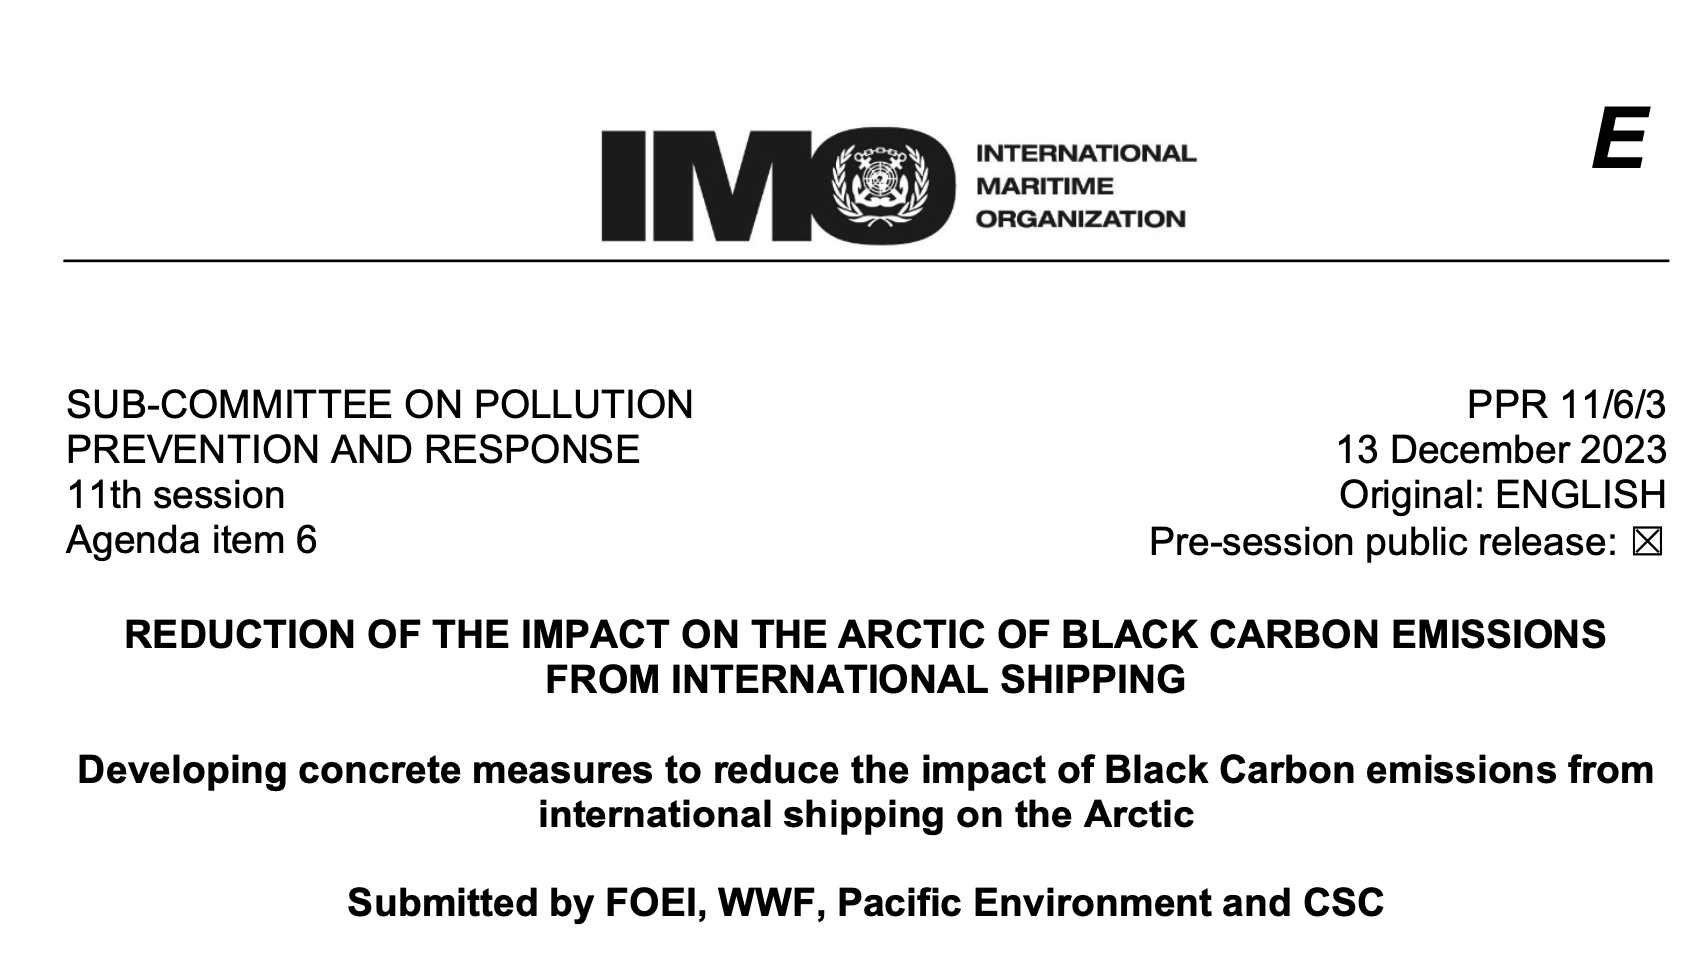 PPR 11-6-3 - Developing concrete measures to reduce the impact of Black Carbon emissions from internati... (FOEI, WWF, Pacific Enviro...)